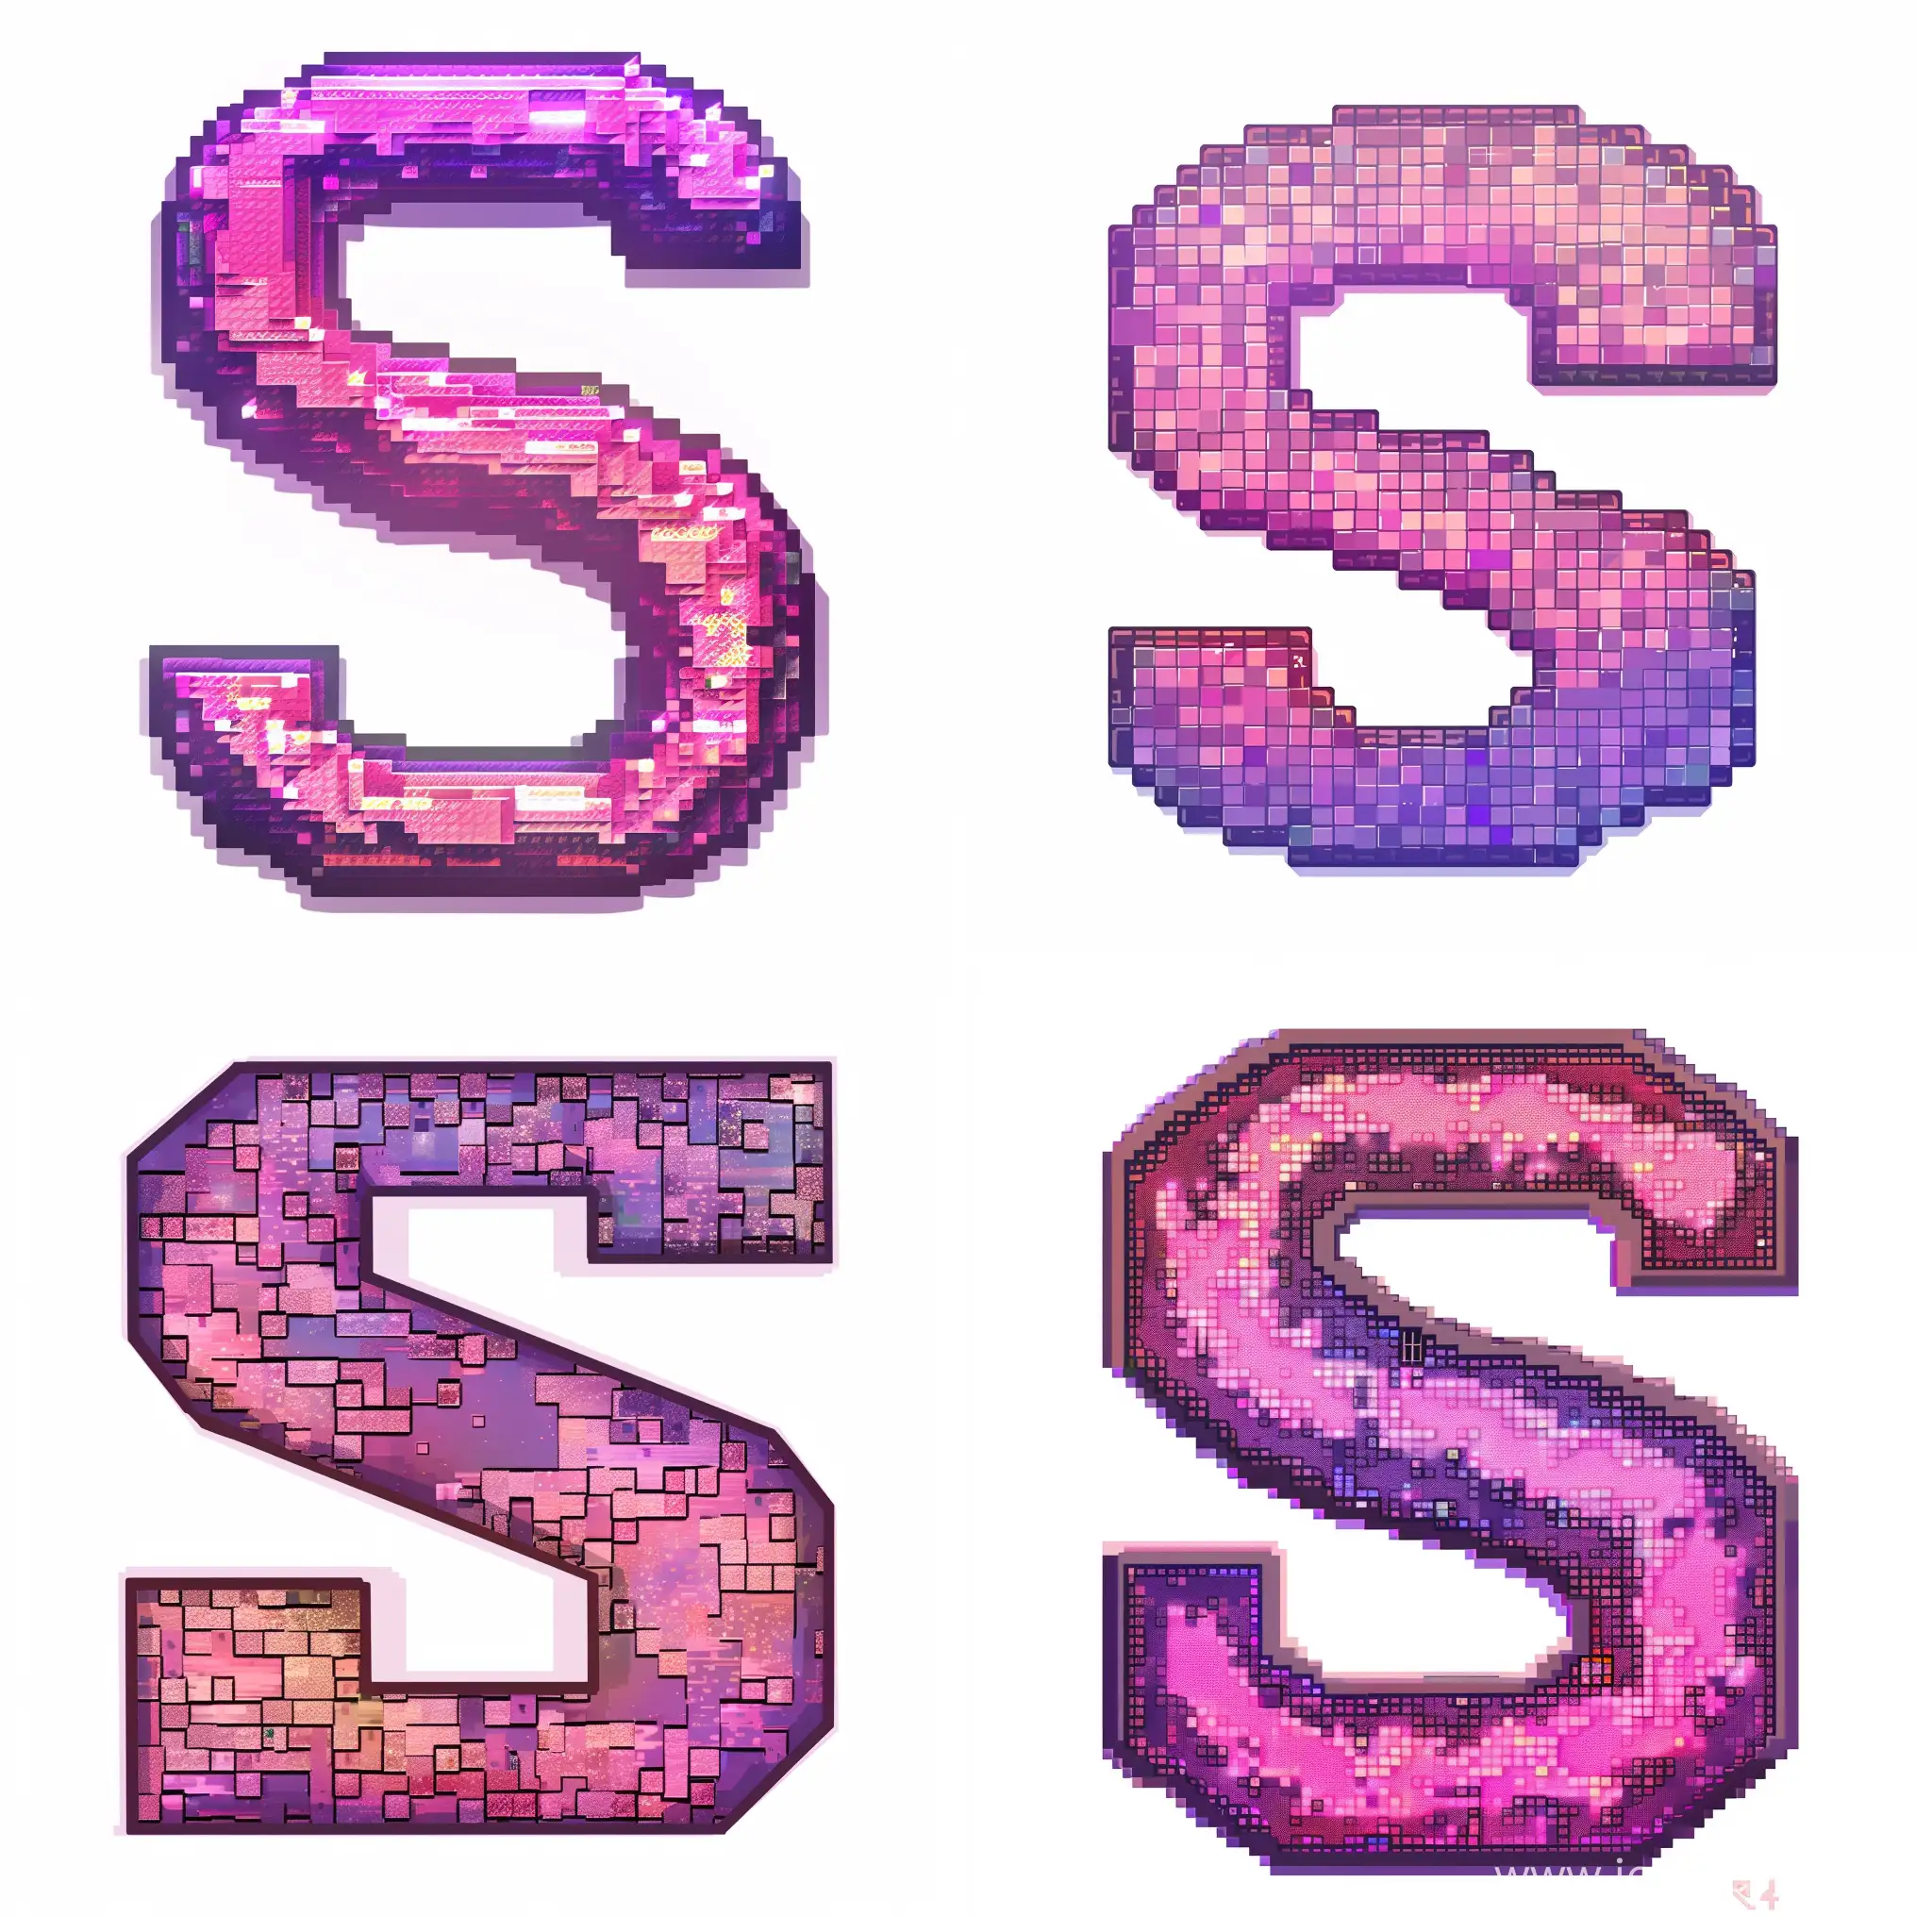 The letter "S" is 16 by 16 pixels, in the style of the minecraft game, in purple and pink tones.